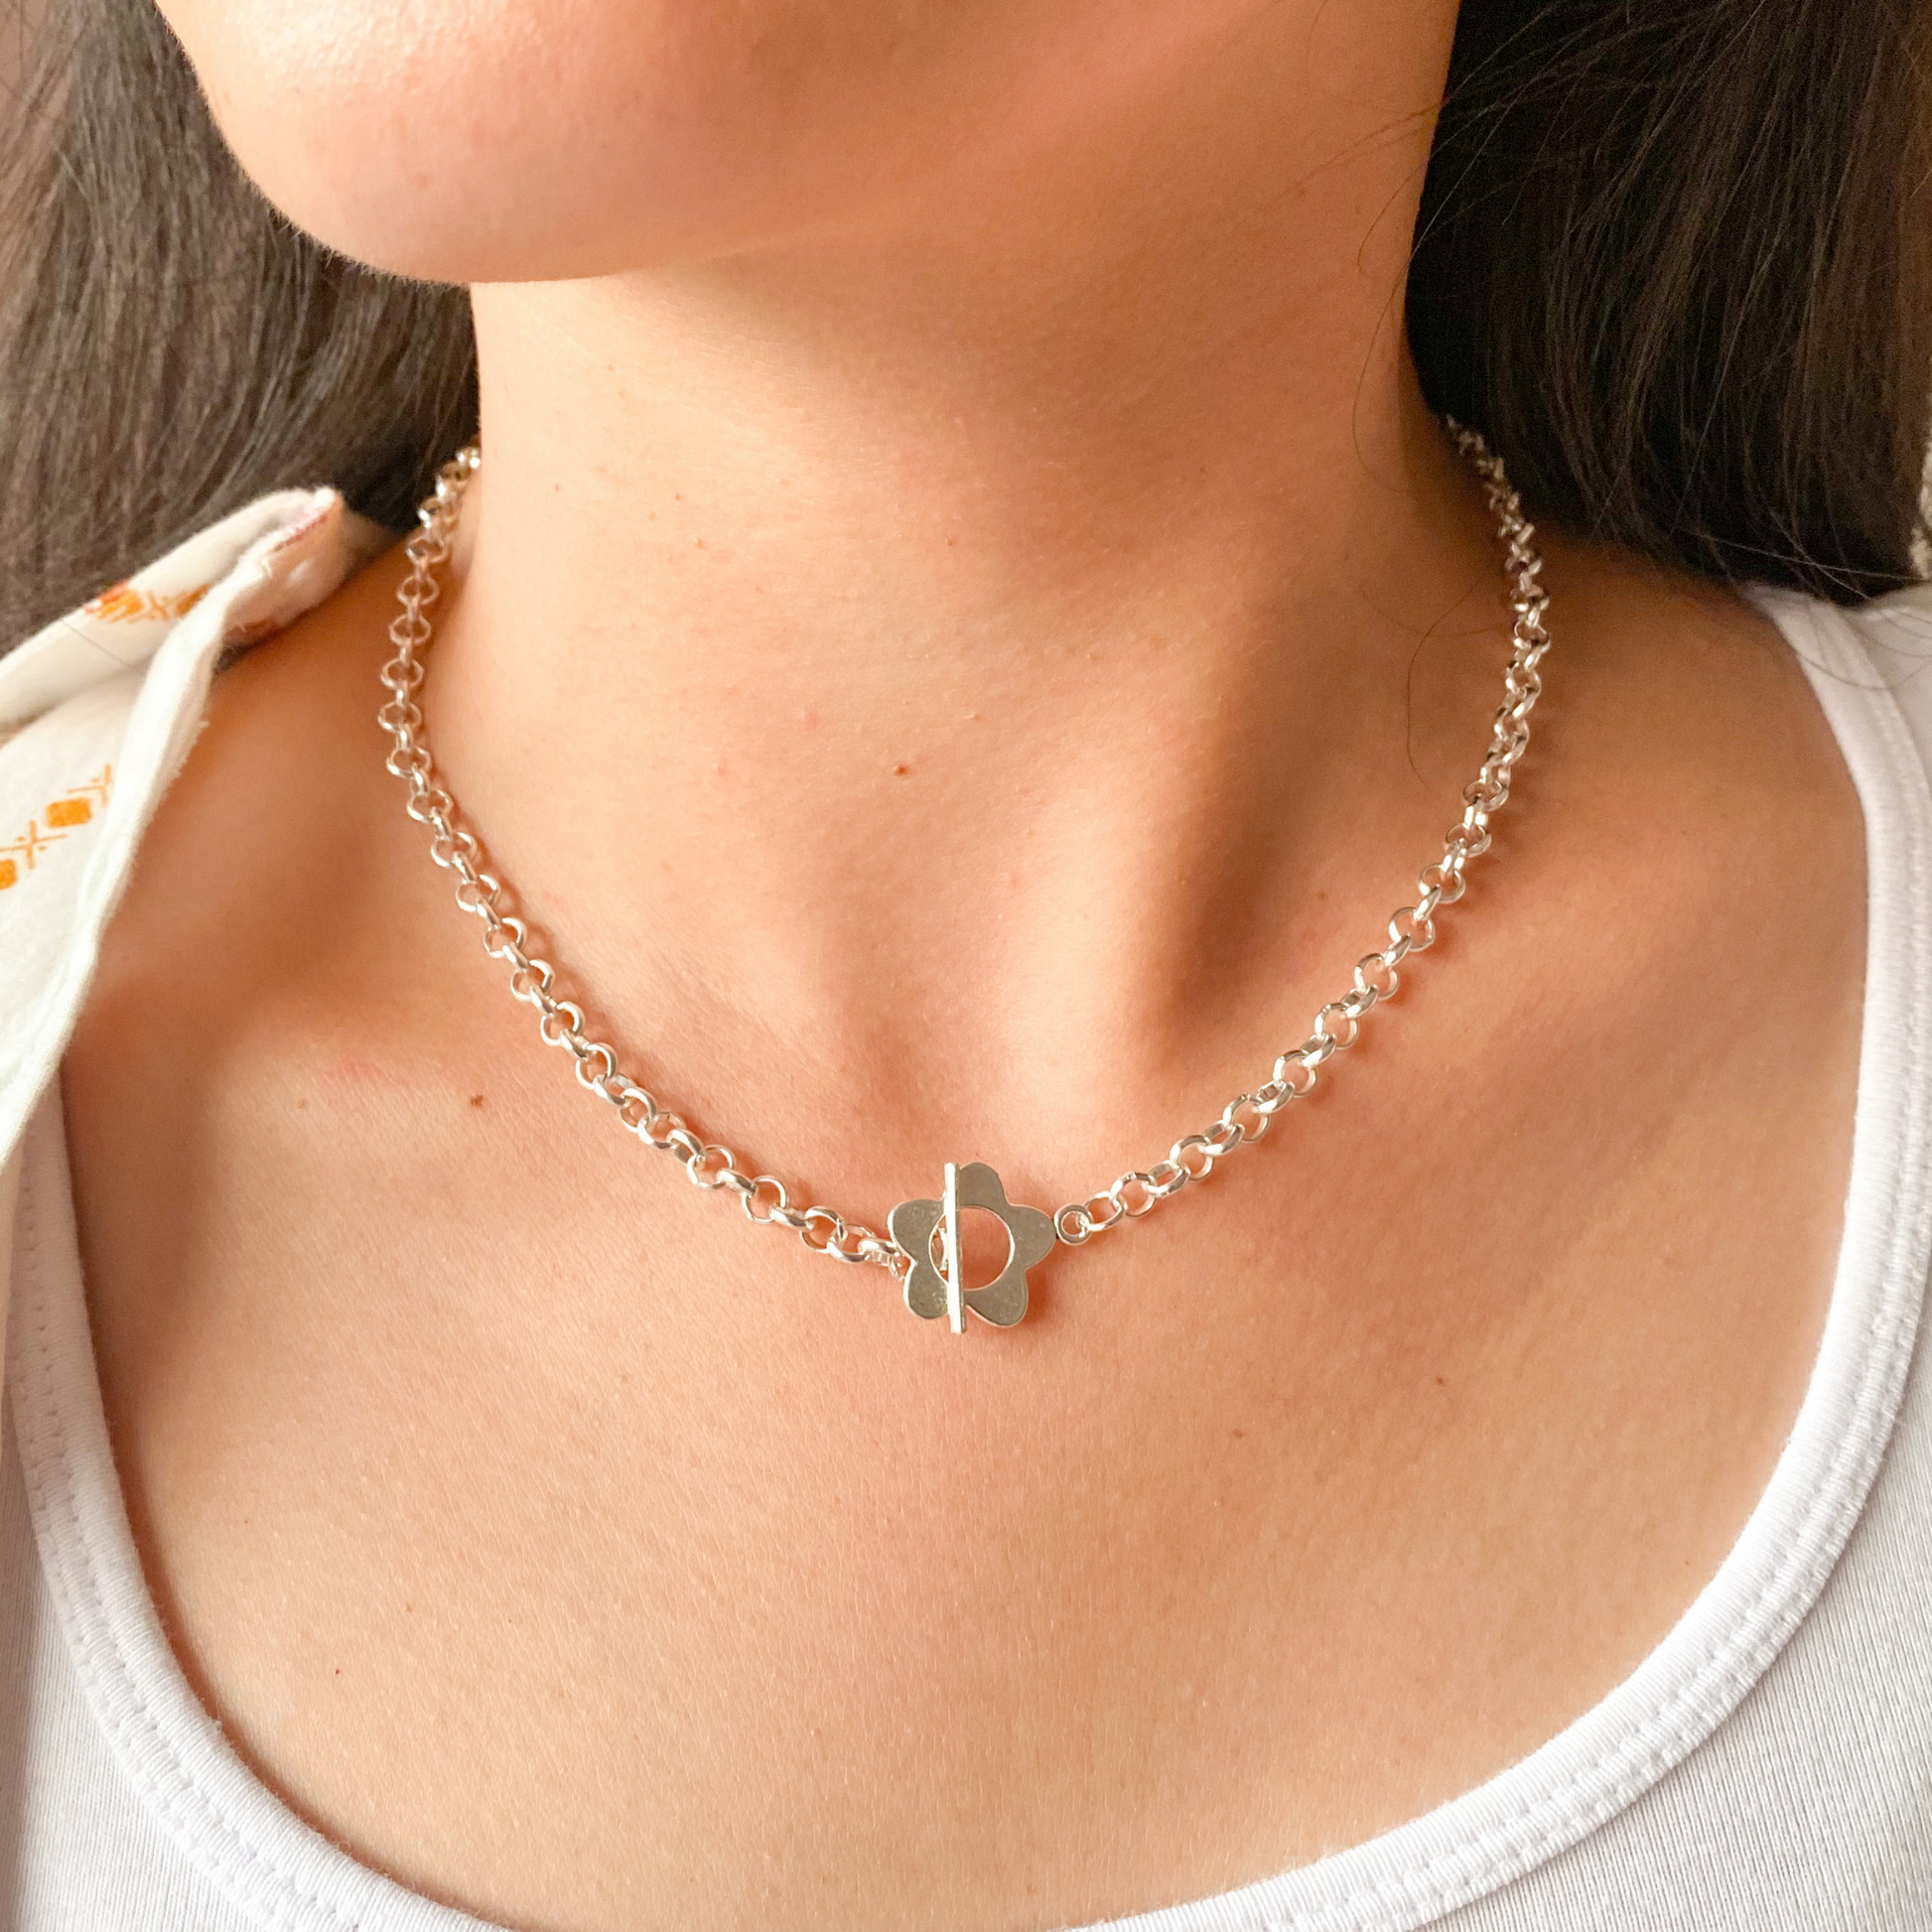 Roop Jewelry flower toggle closure pendant, silver plated rolo chain necklace, chunky chain necklace in silver.